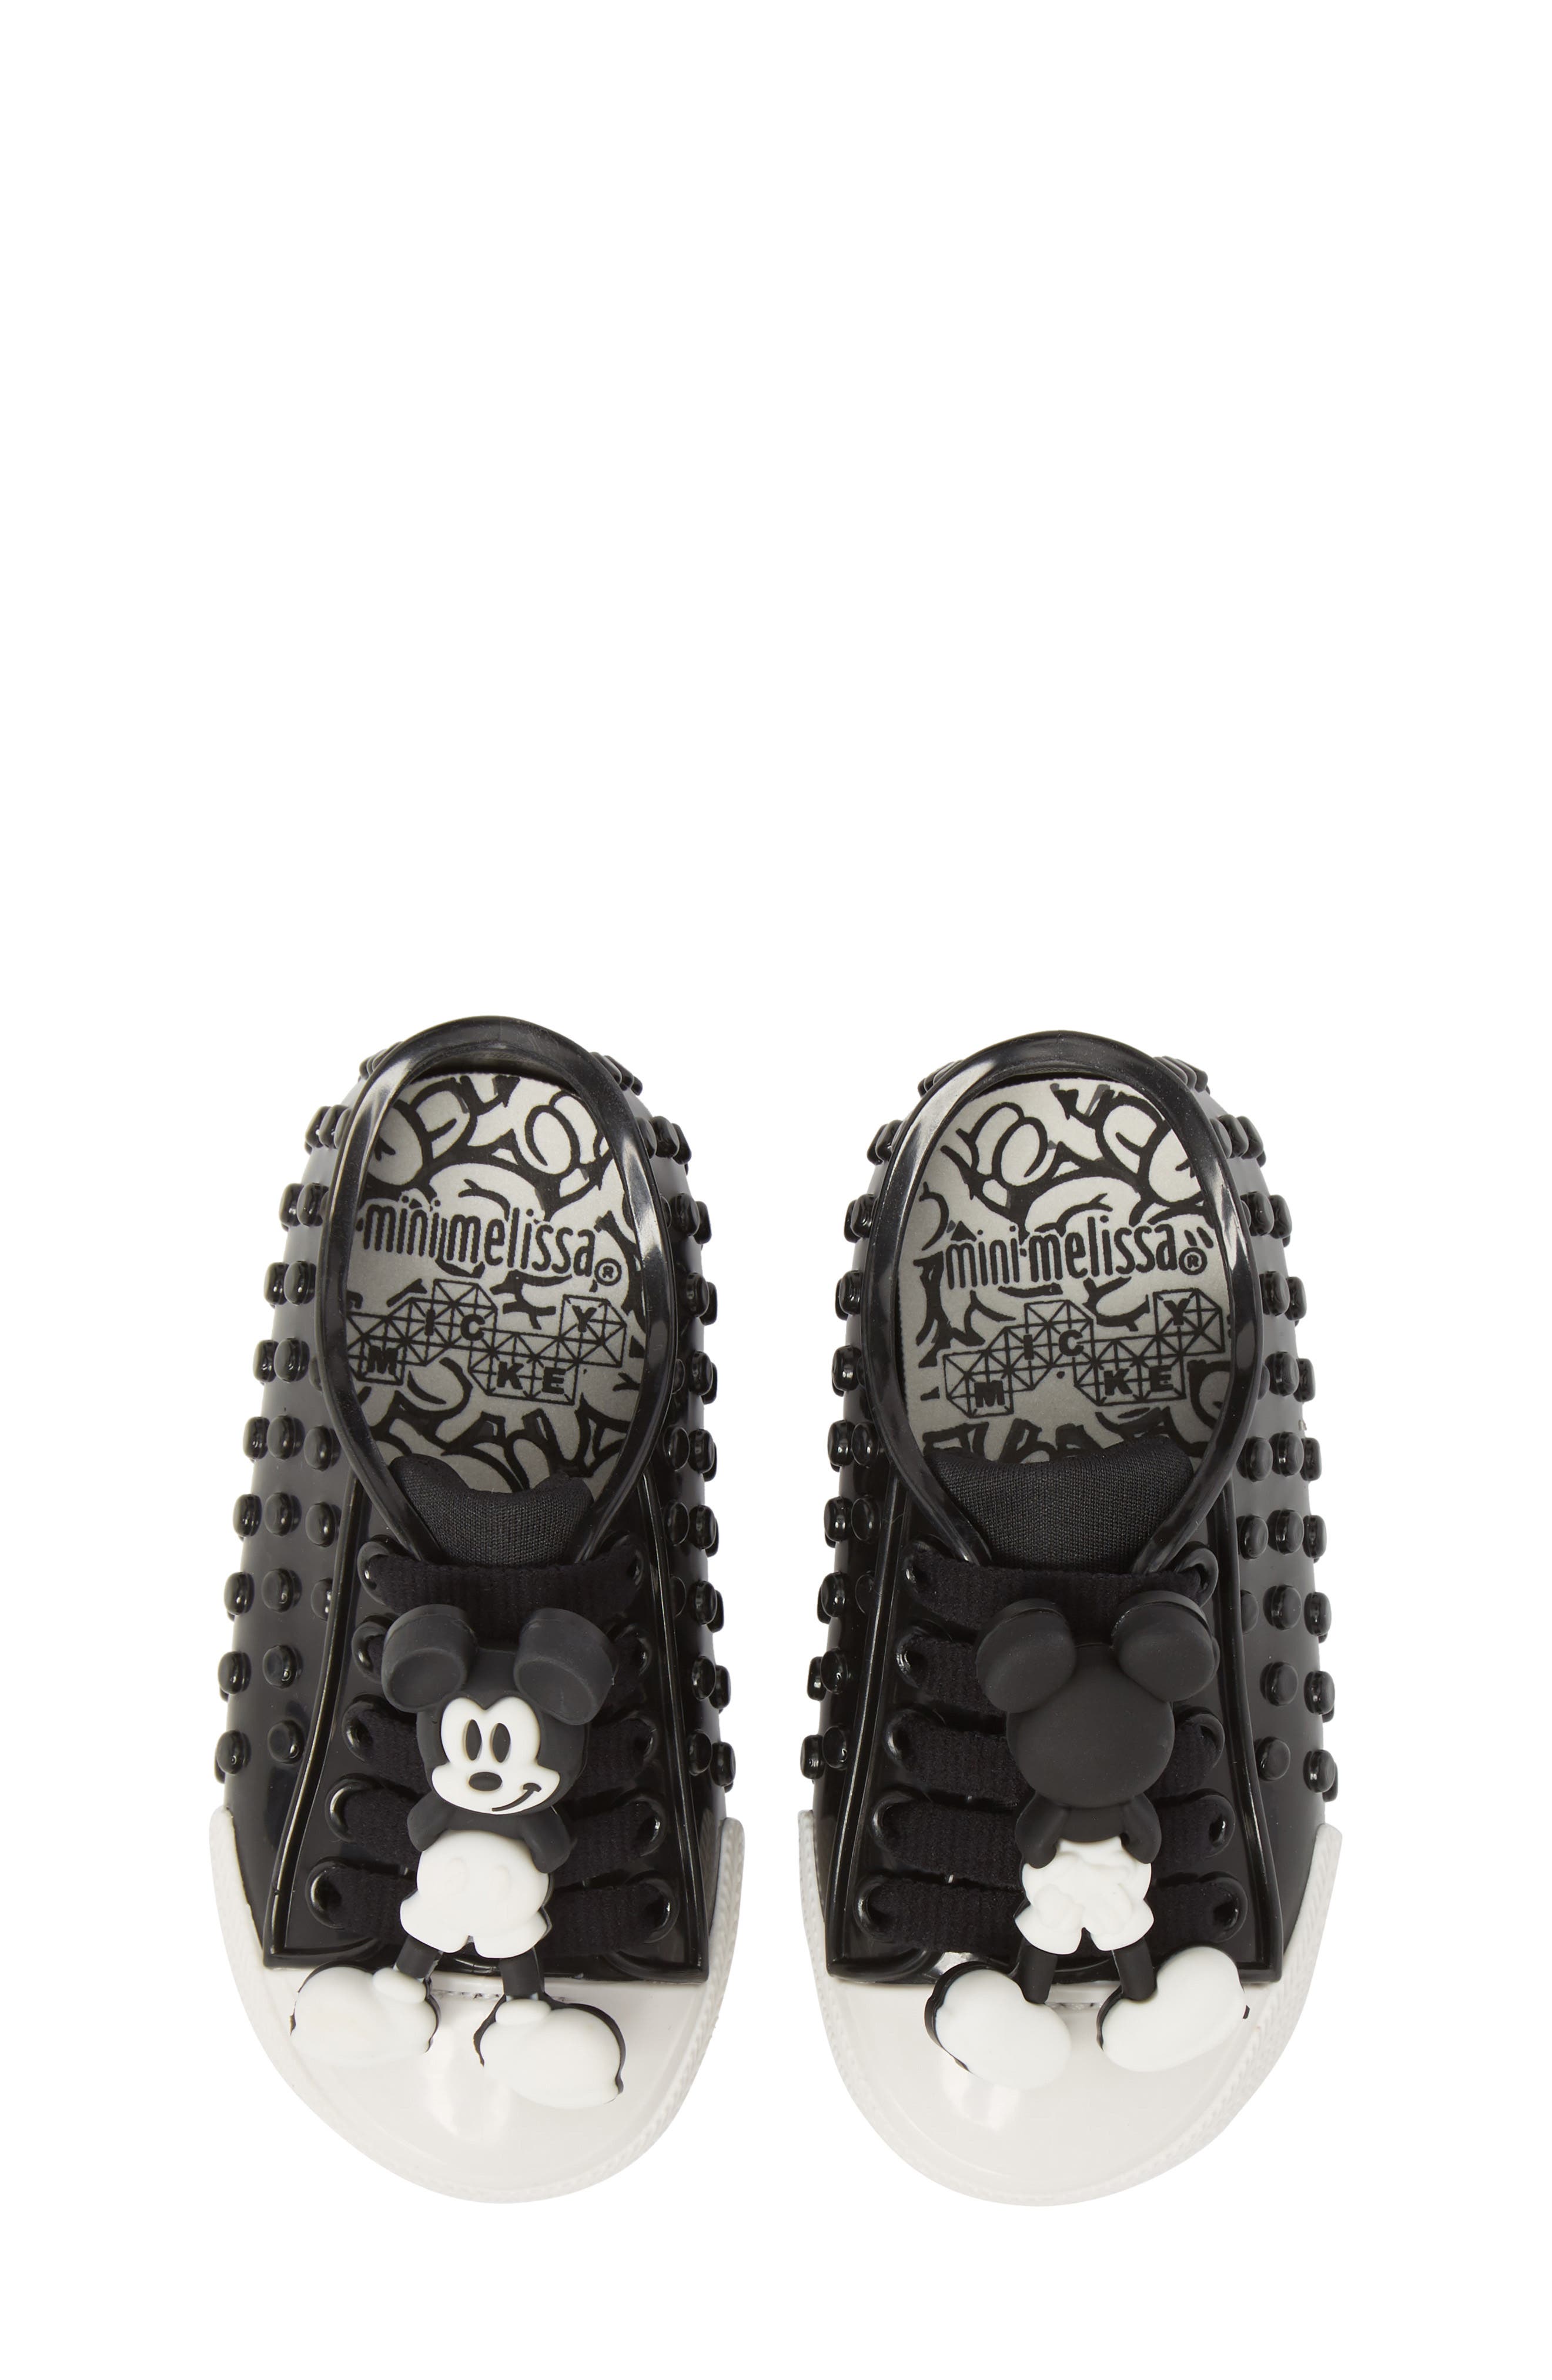 melissa mickey mouse shoes